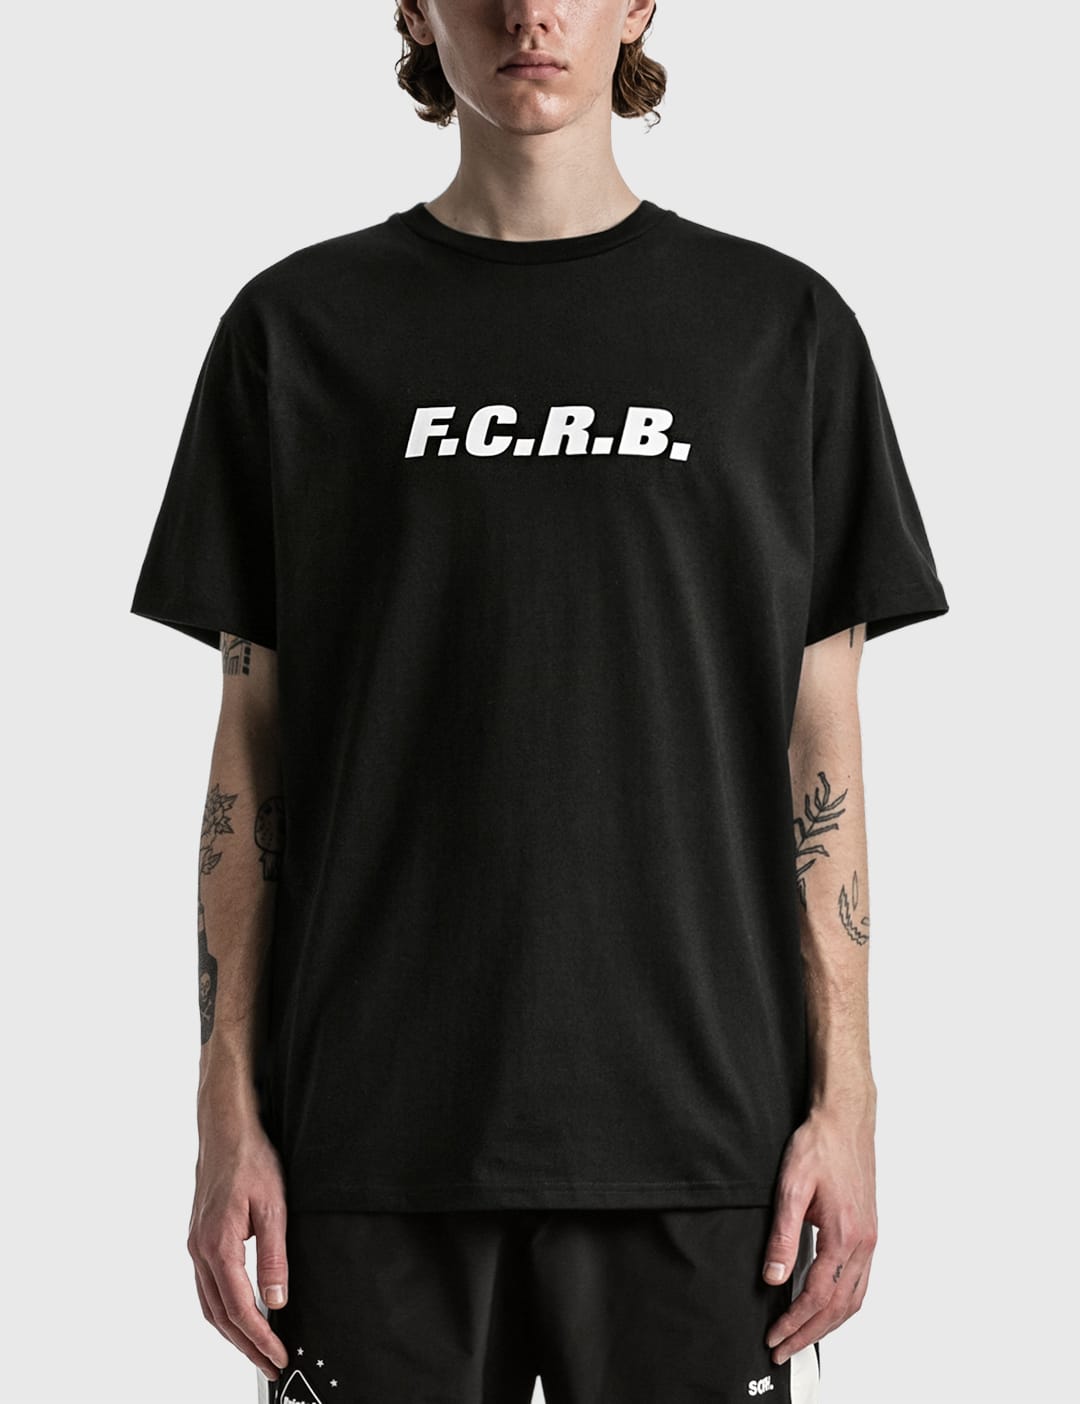 F.C. Real Bristol - FCRB. AUTHENTIC T-SHIRT | HBX - HYPEBEAST 為您 